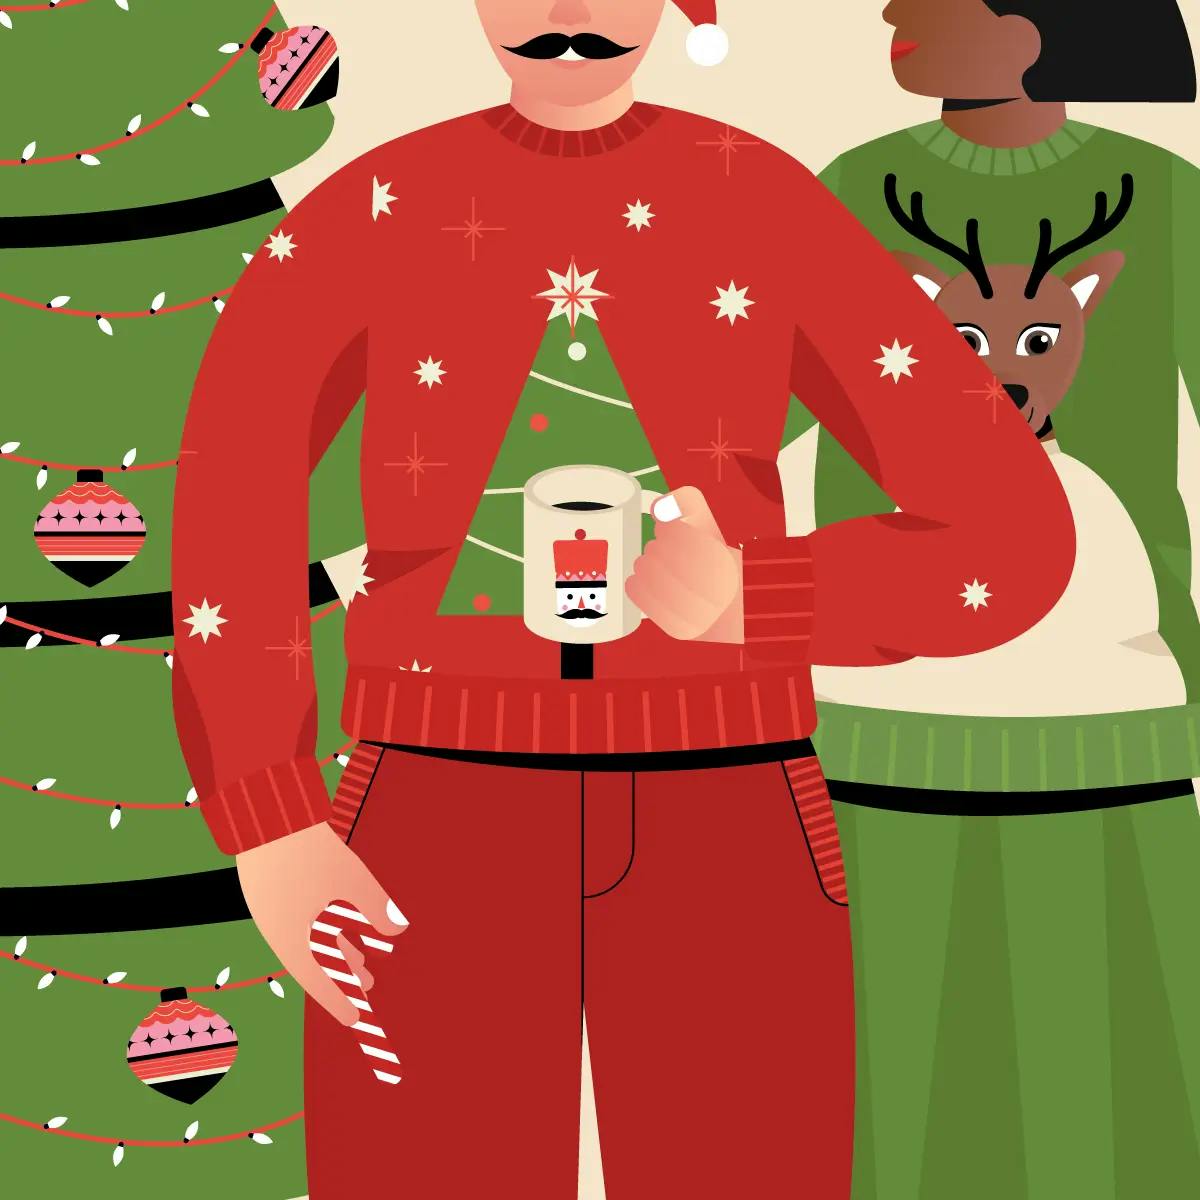 Illustration showing the torso of a man and a woman wearing ugly Christmas sweaters. The man is holding a mug of hot chocolate and there’s a Christmas tree in the background.